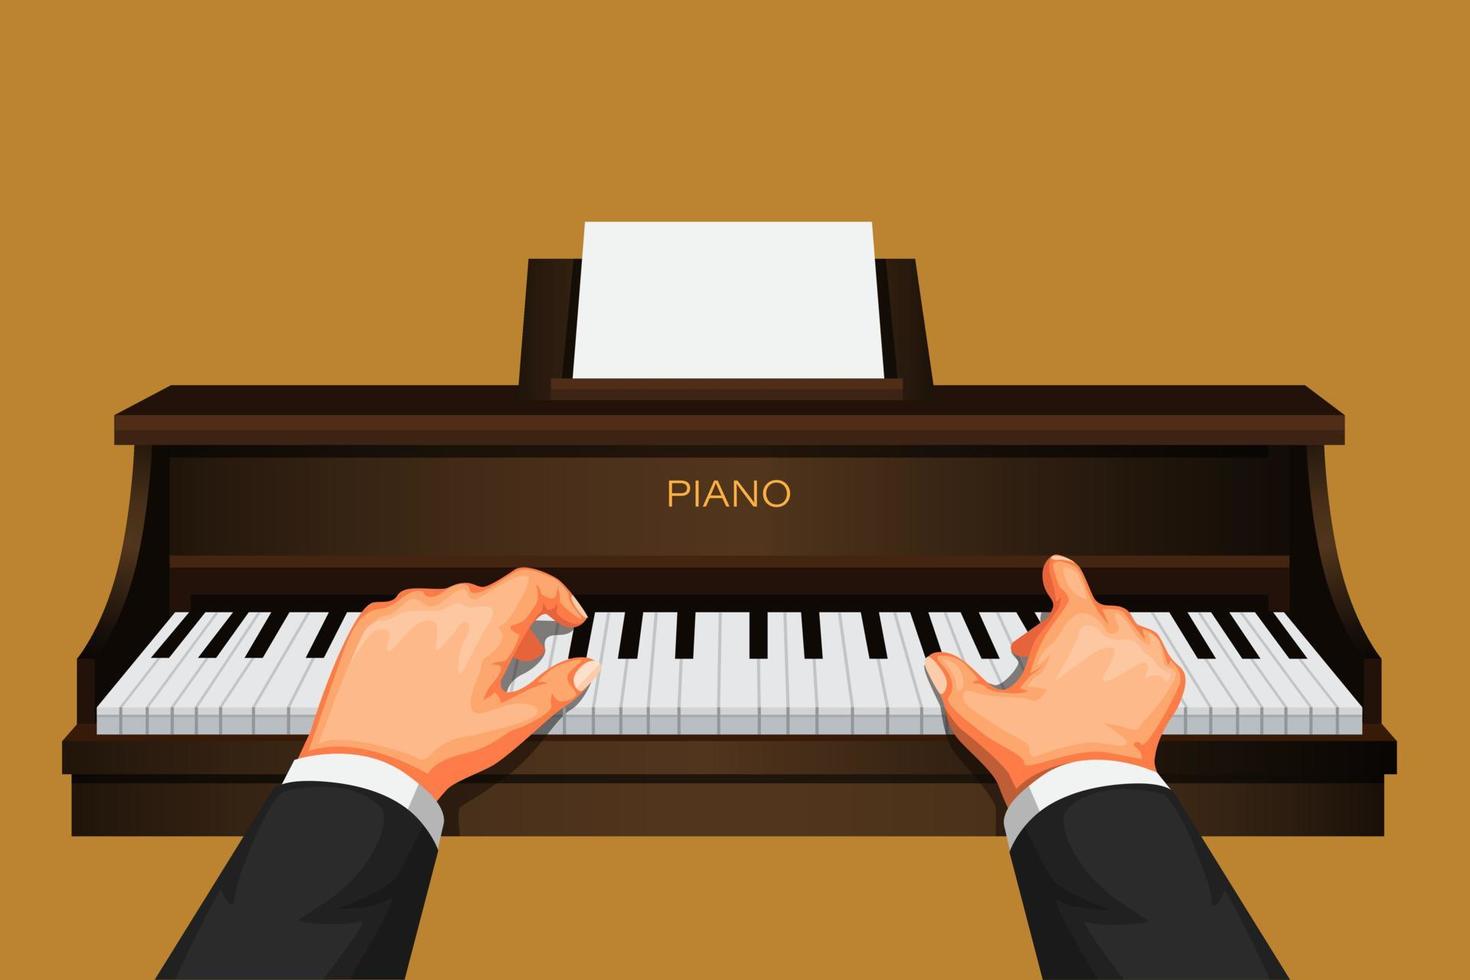 Hand playing piano, pianist musician pratice symbol concept in cartoon illustration vector